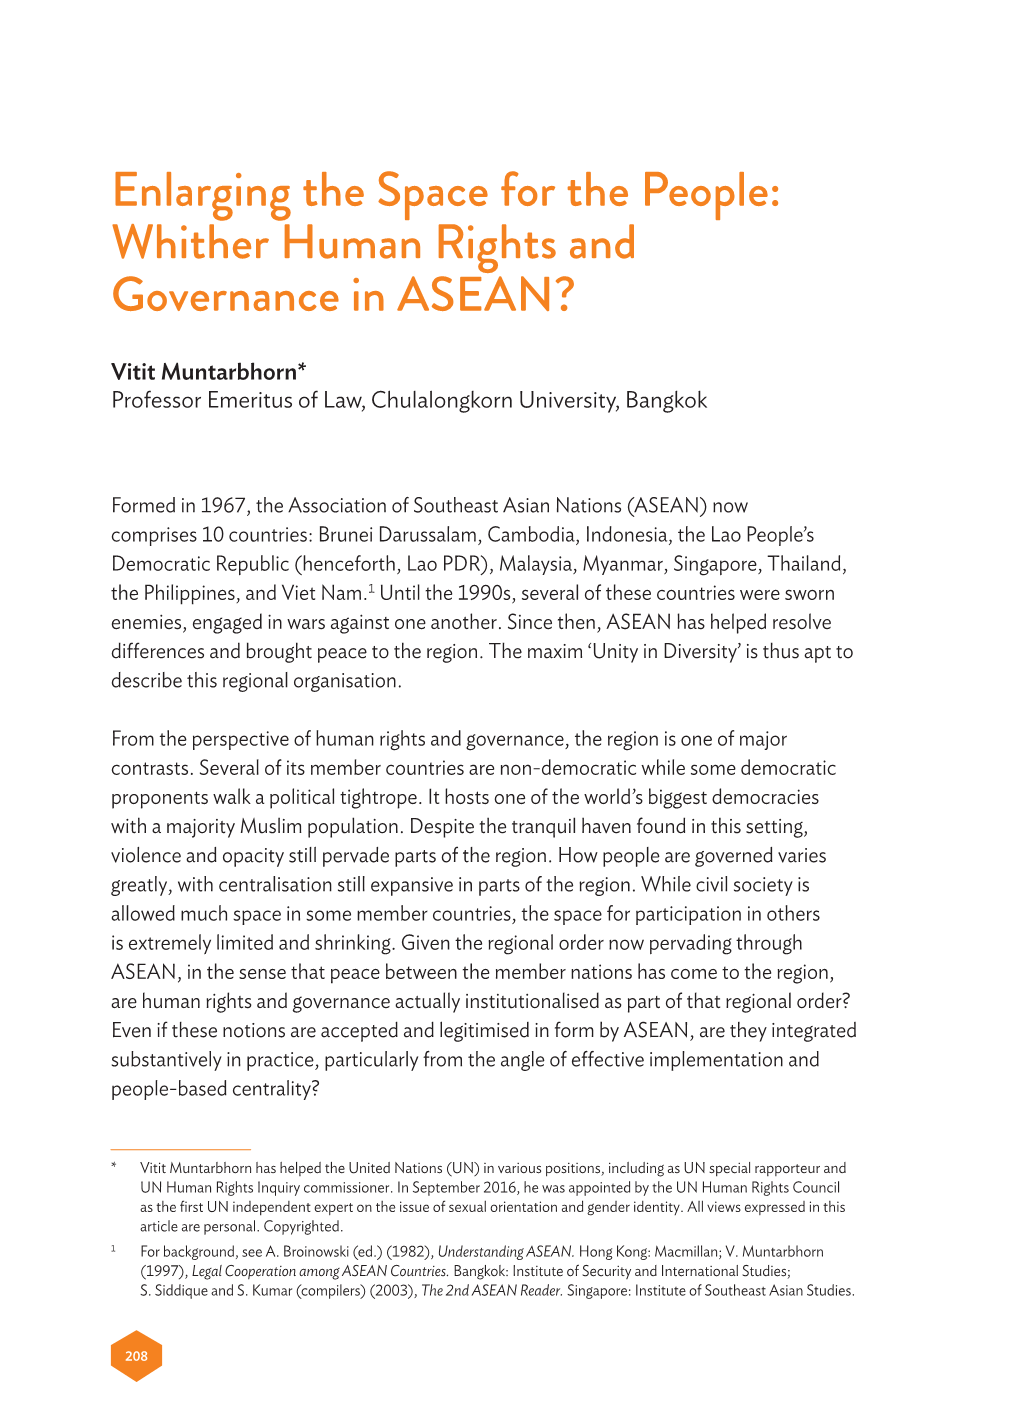 Whither Human Rights and Governance in ASEAN?